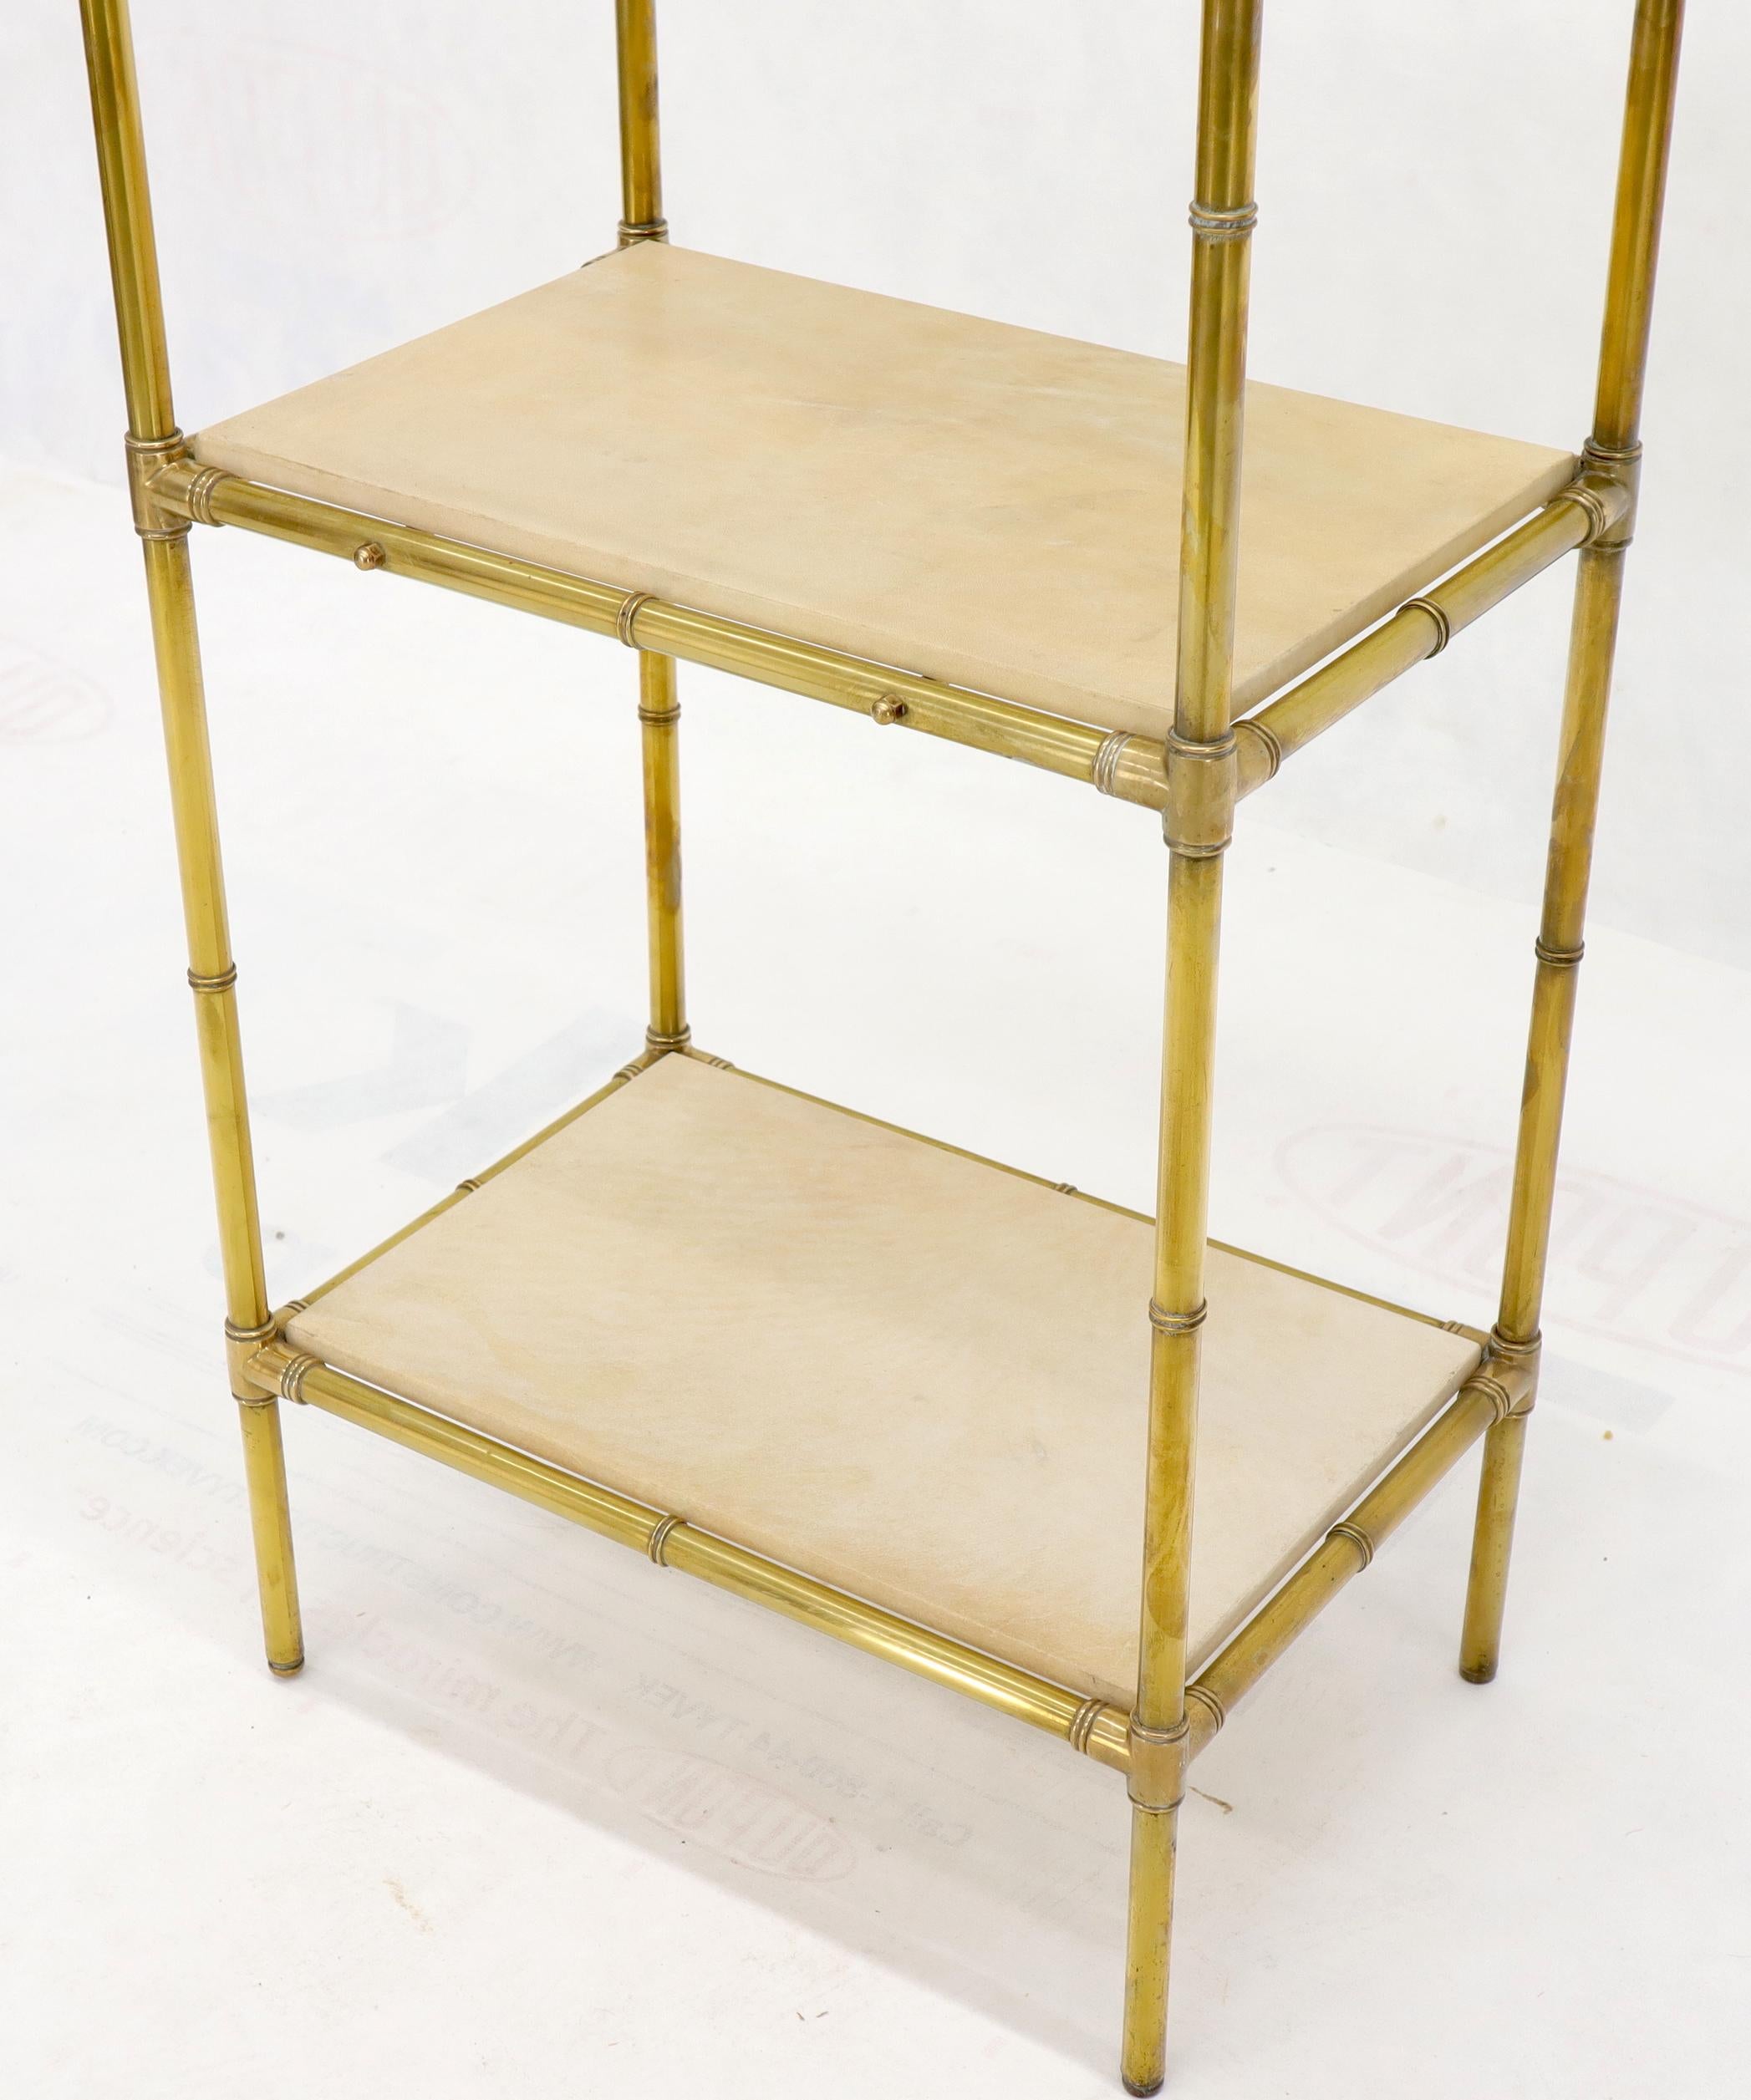 Pair Solid Brass Faux Bamboo Arch Shape Top Goat Skin Parchment Shelves Etageres In Excellent Condition For Sale In Rockaway, NJ